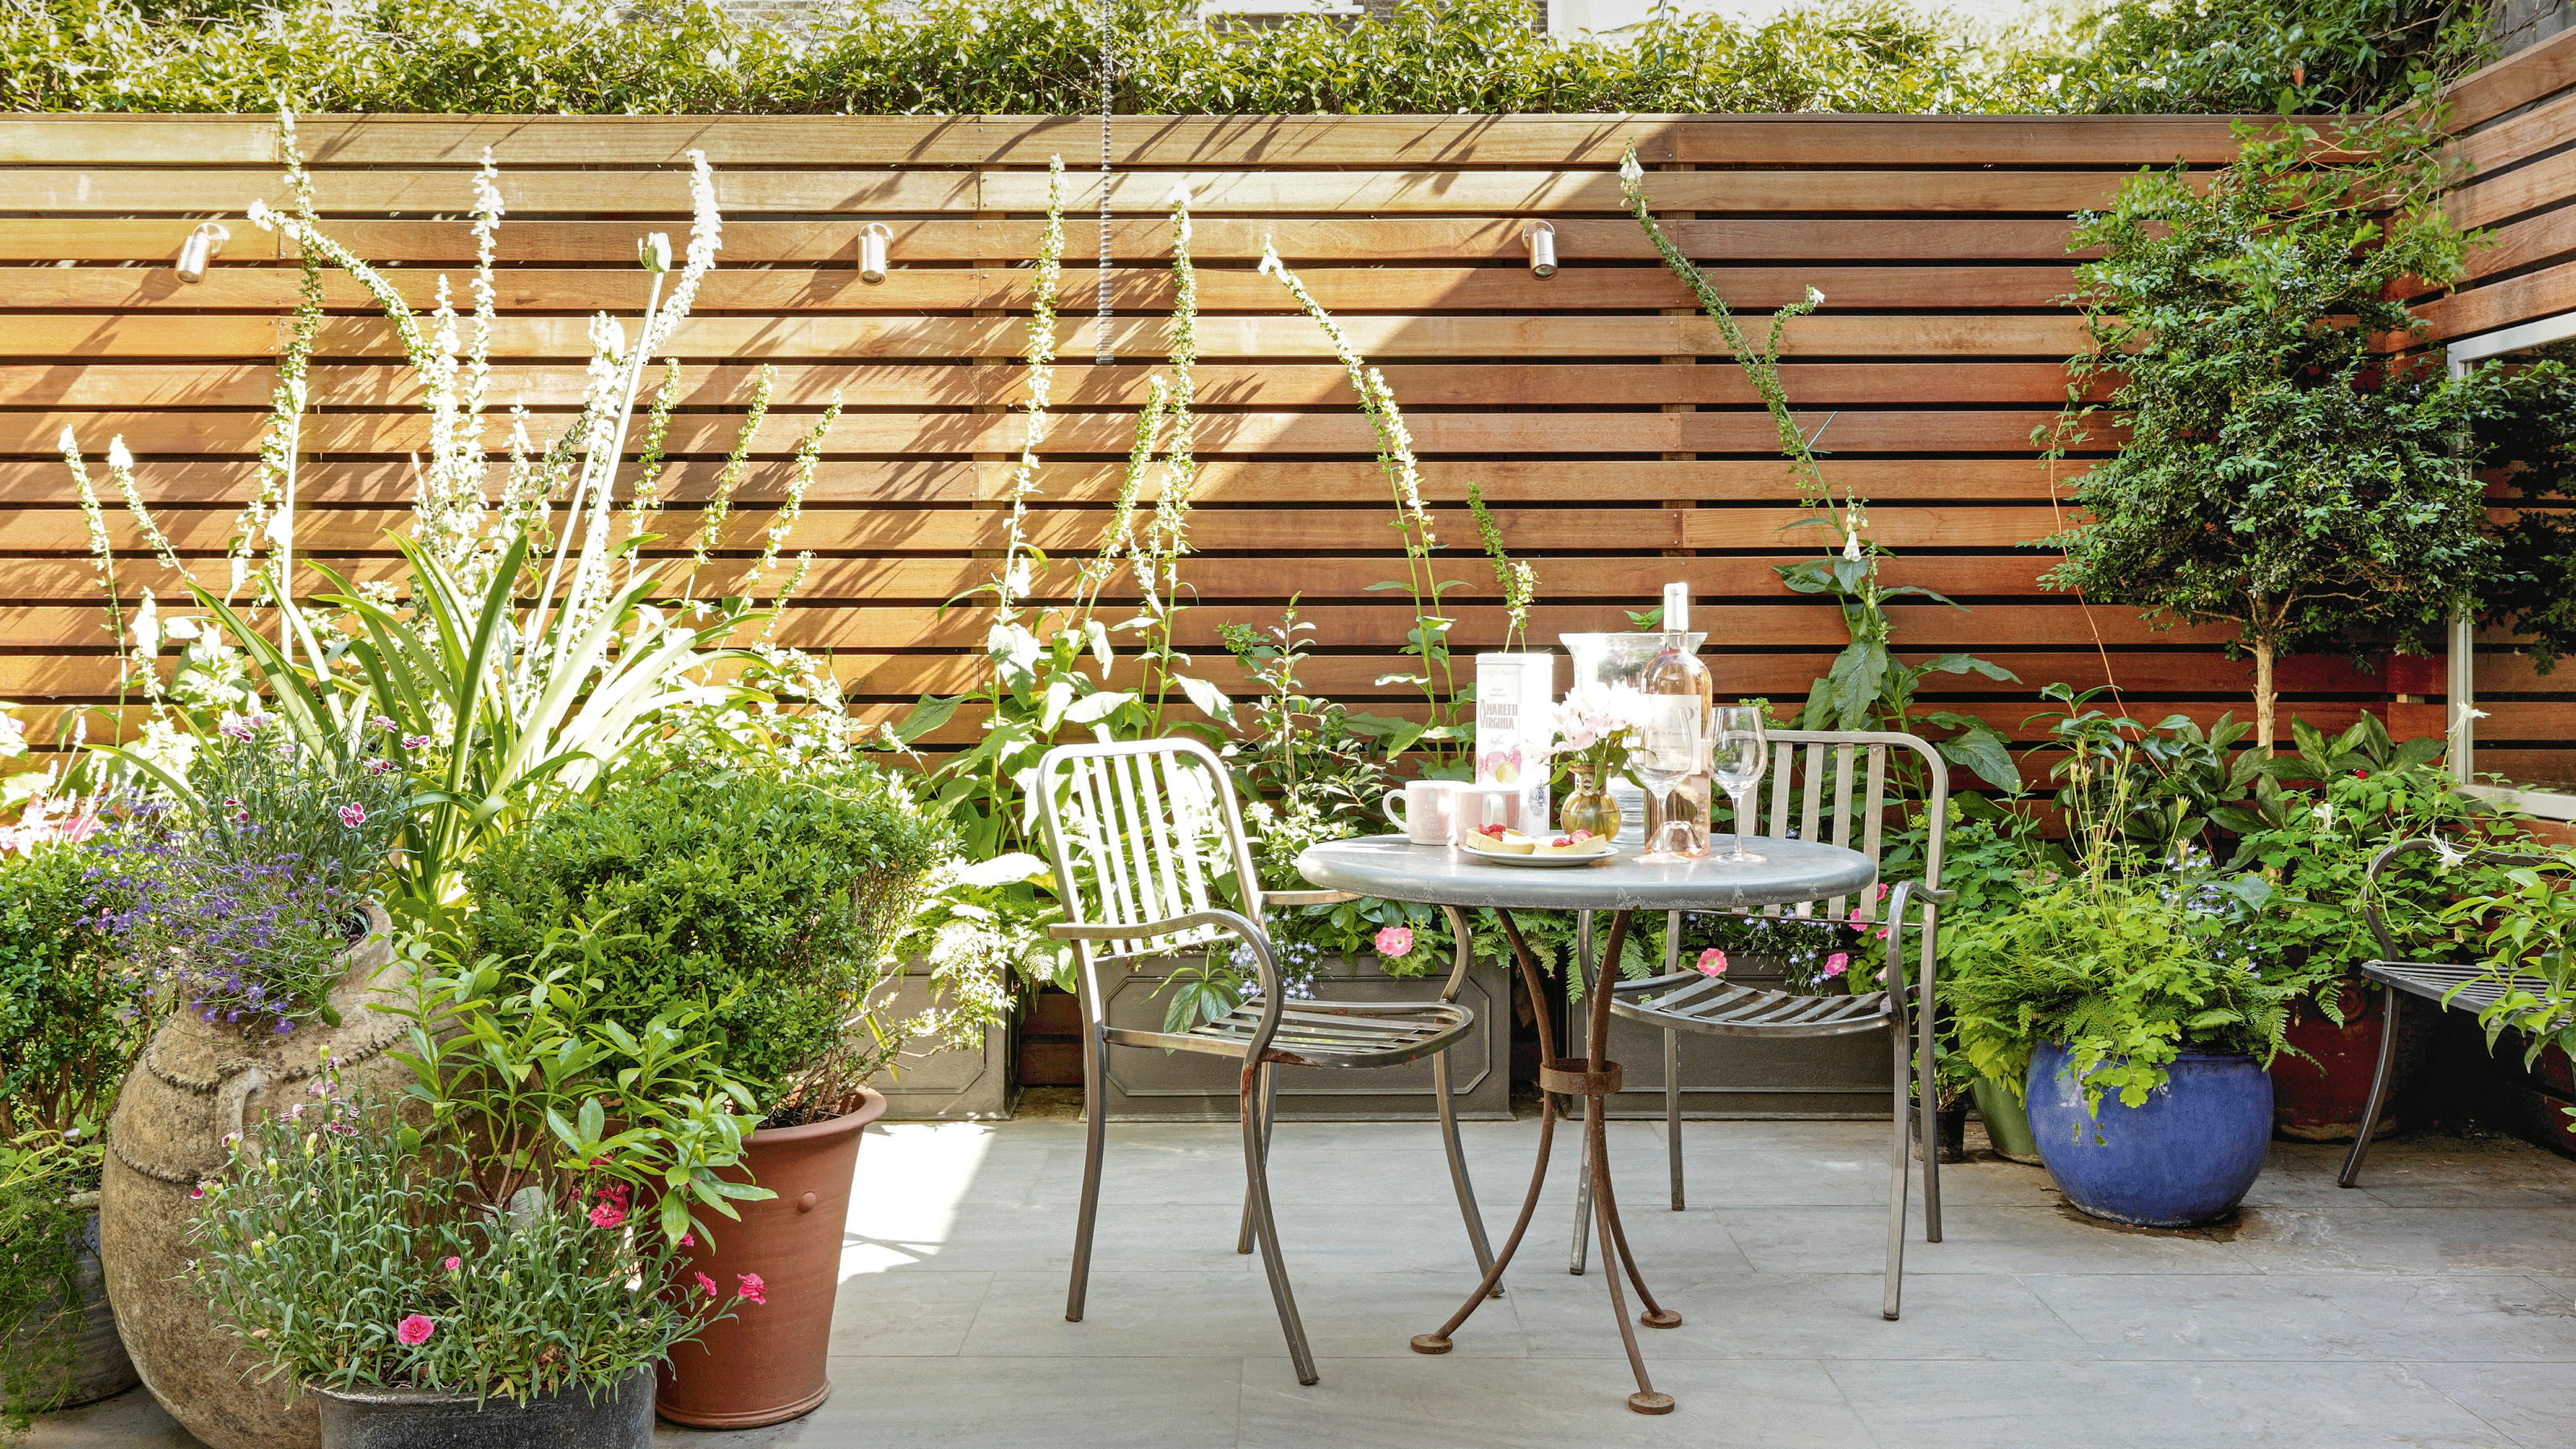 Patio courtyard with potted plants and bistro set